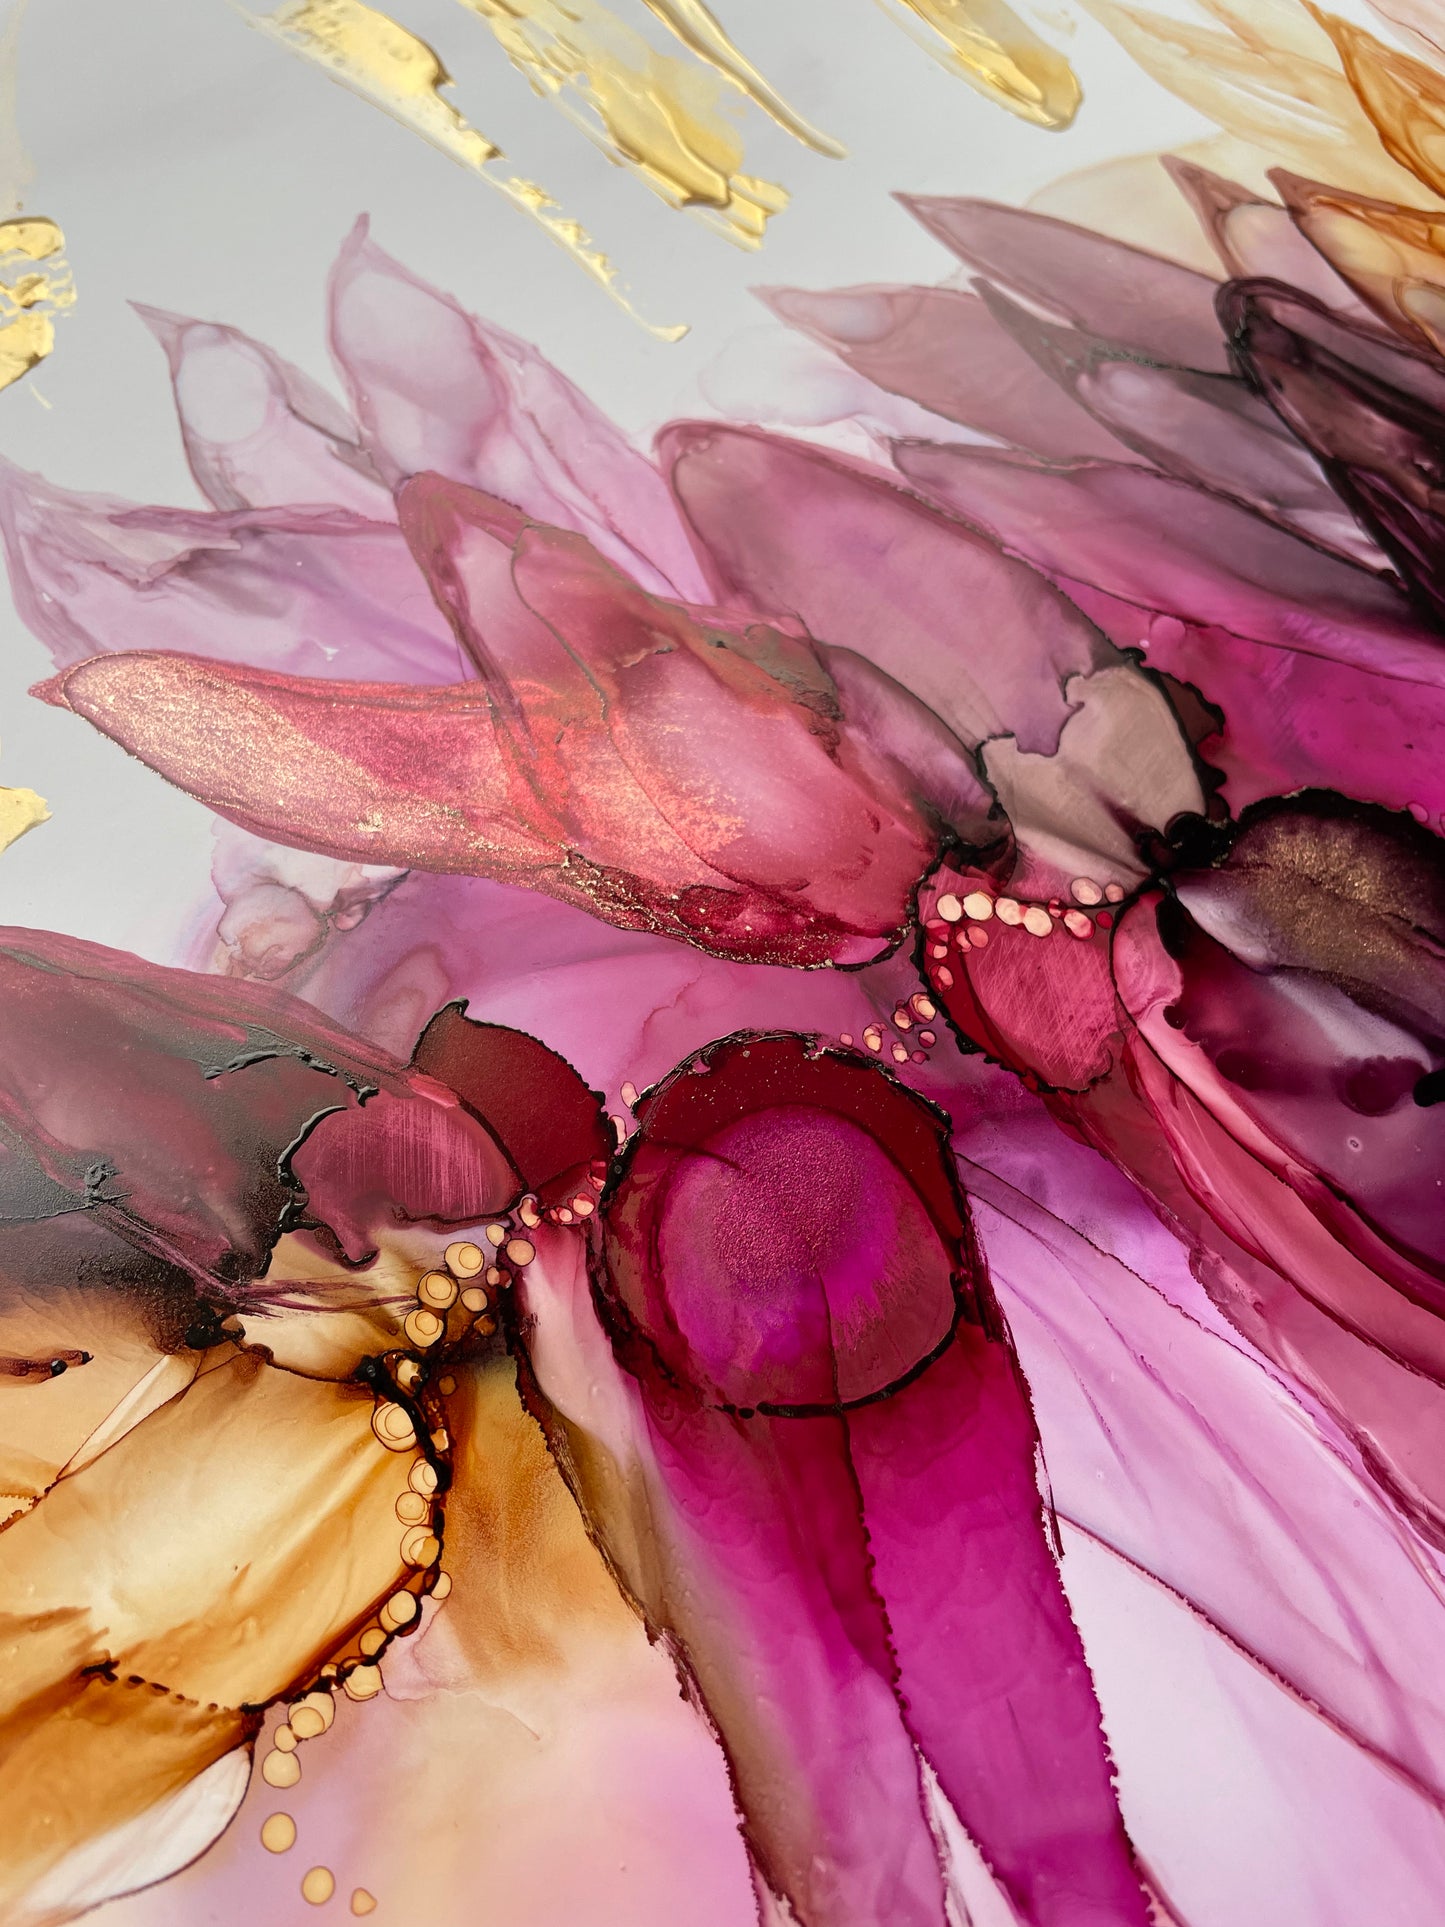 Glorious I Large floral textured abstract artwork in pink, purple and gold.